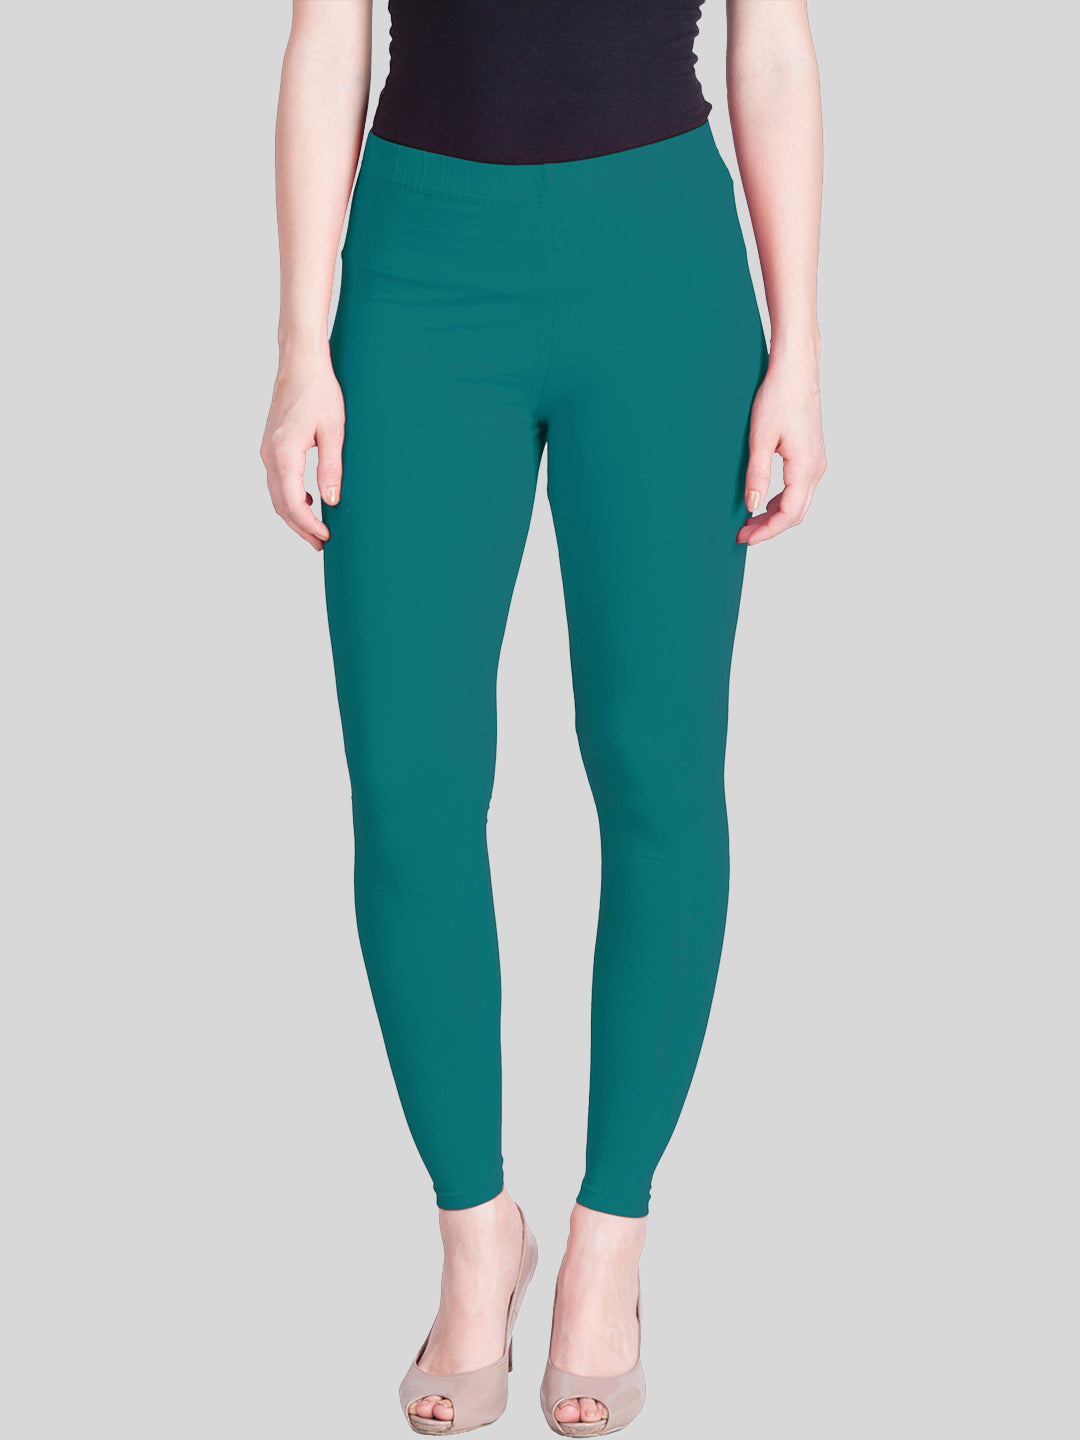 Prisma's Rama Green Shimmer Leggings for a Unique Style